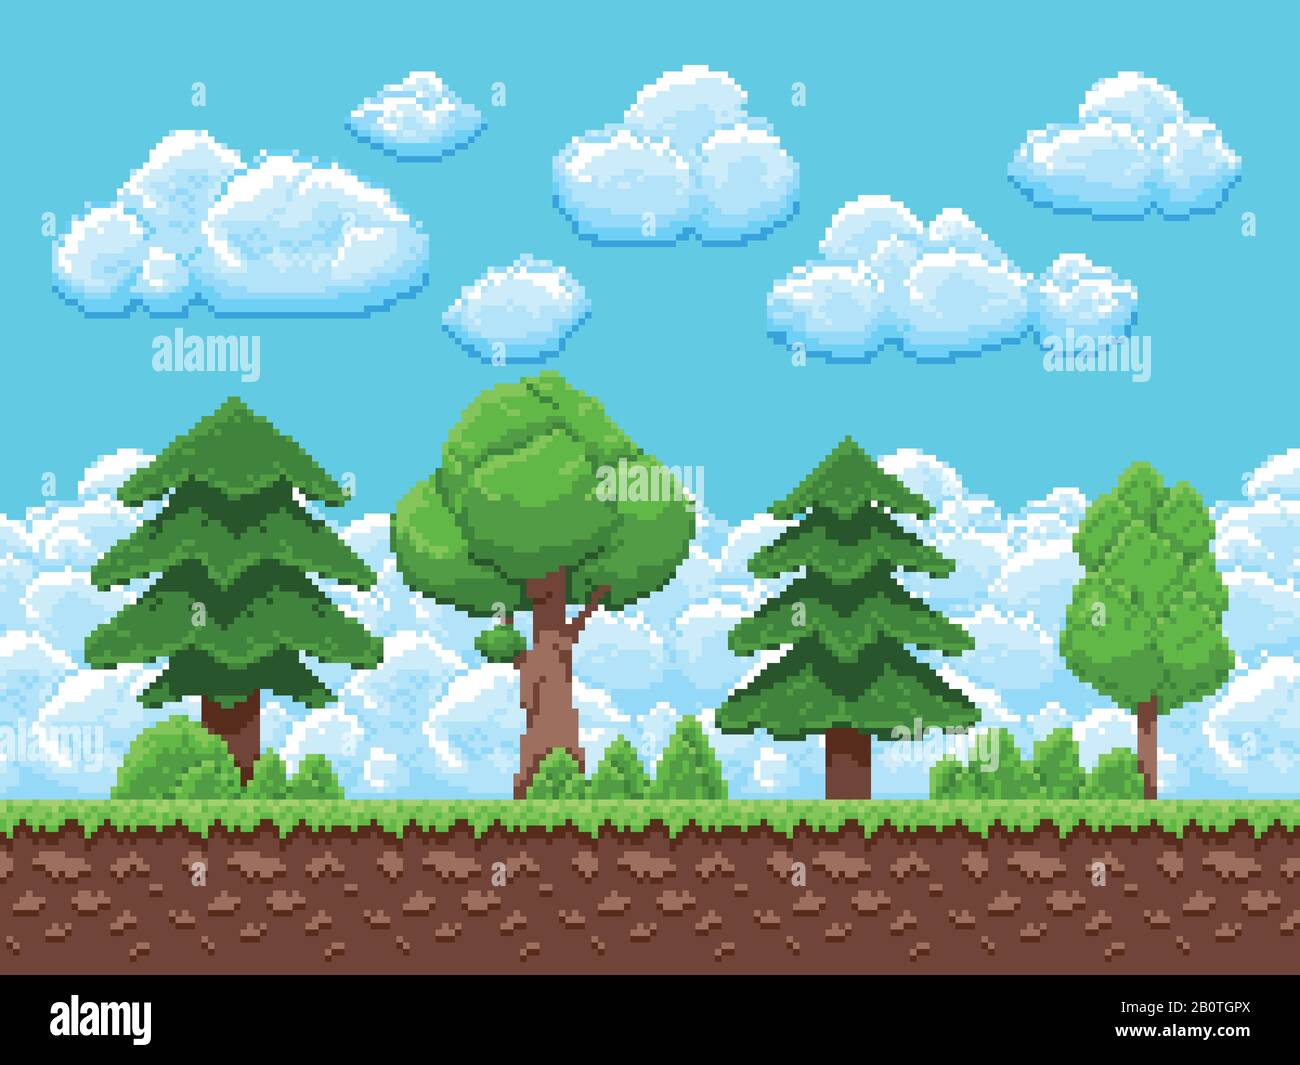 Pixel game vector landscape with trees, sky and clouds for 8 bit vintage arcade game. Landscape game scene interface illustration Stock Vector